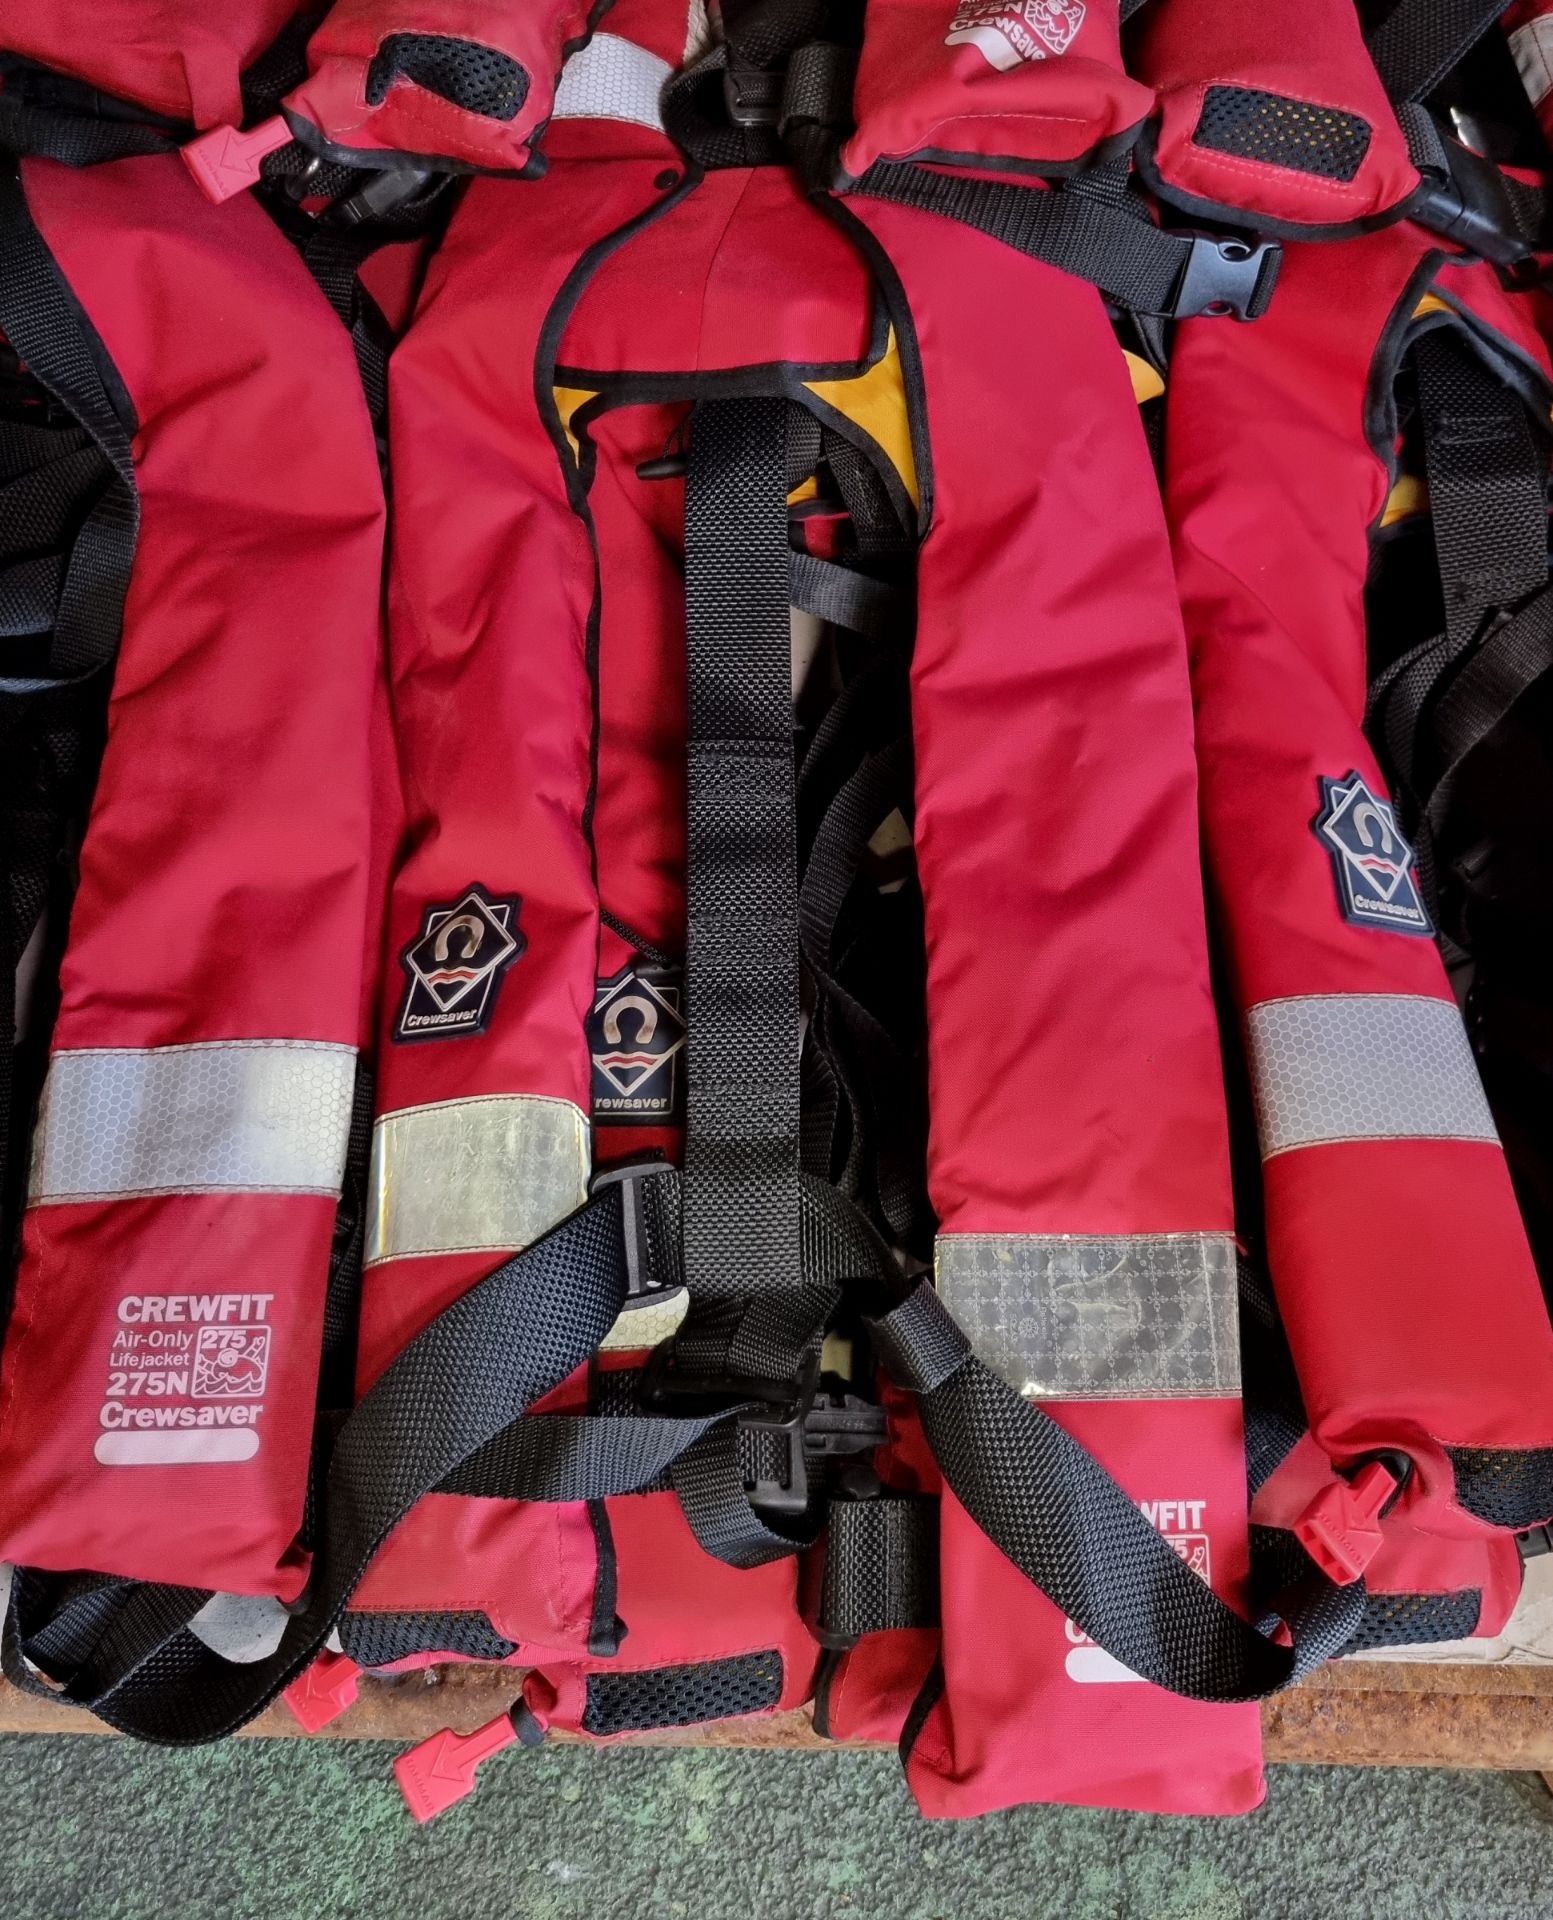 20x Crewfit 275N Crewsaver air-only lifejackets - CO2 CARTRIDGES OUT OF DATE - UNCERTIFIED - Bild 3 aus 3